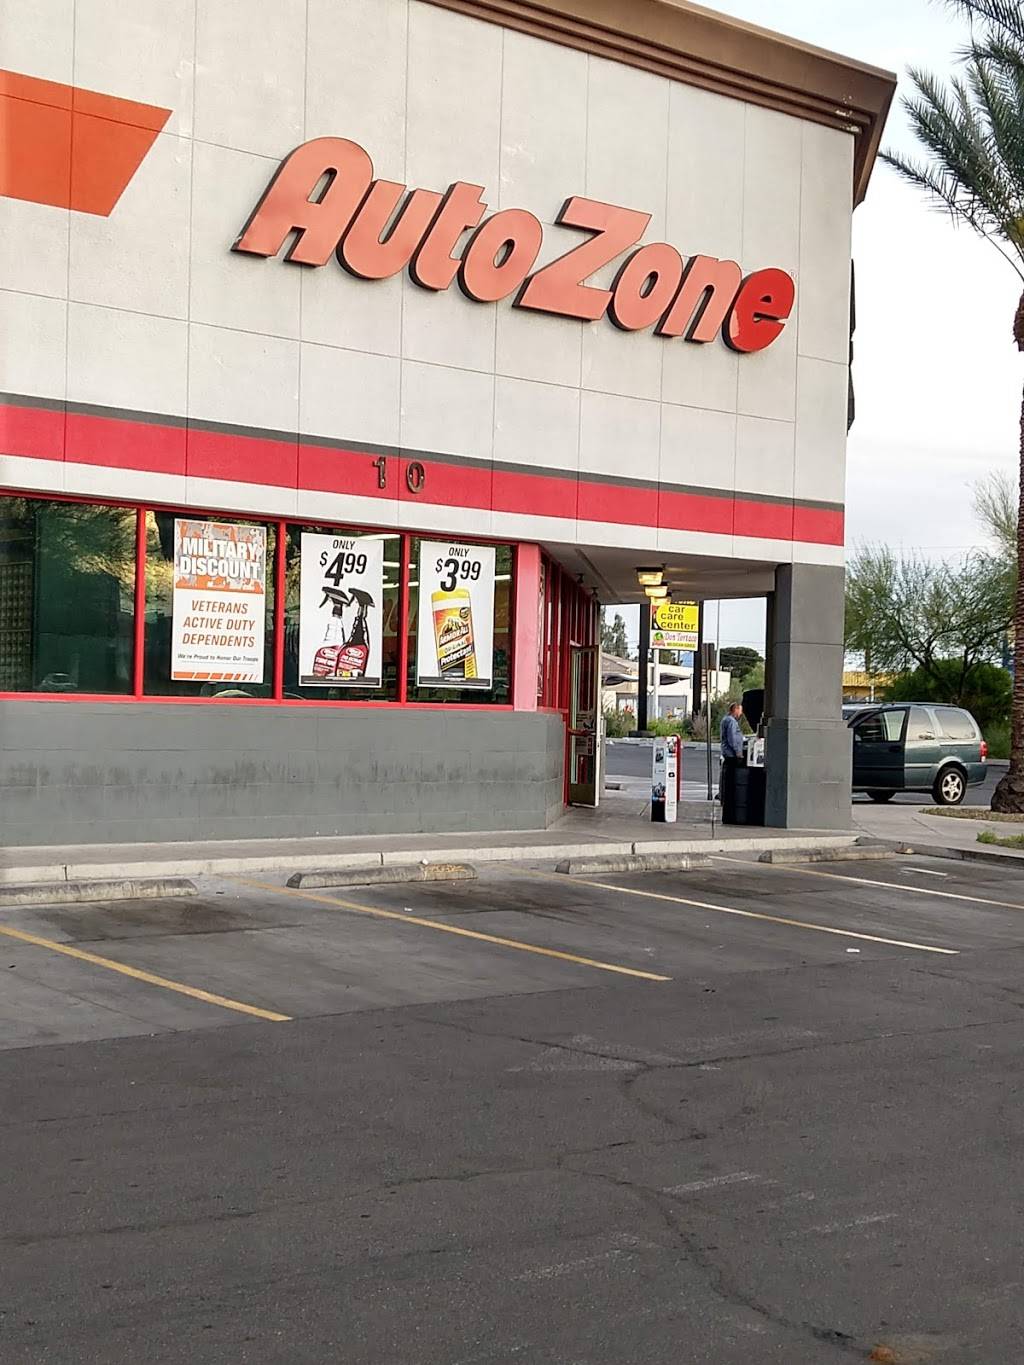 where is the closest autozone